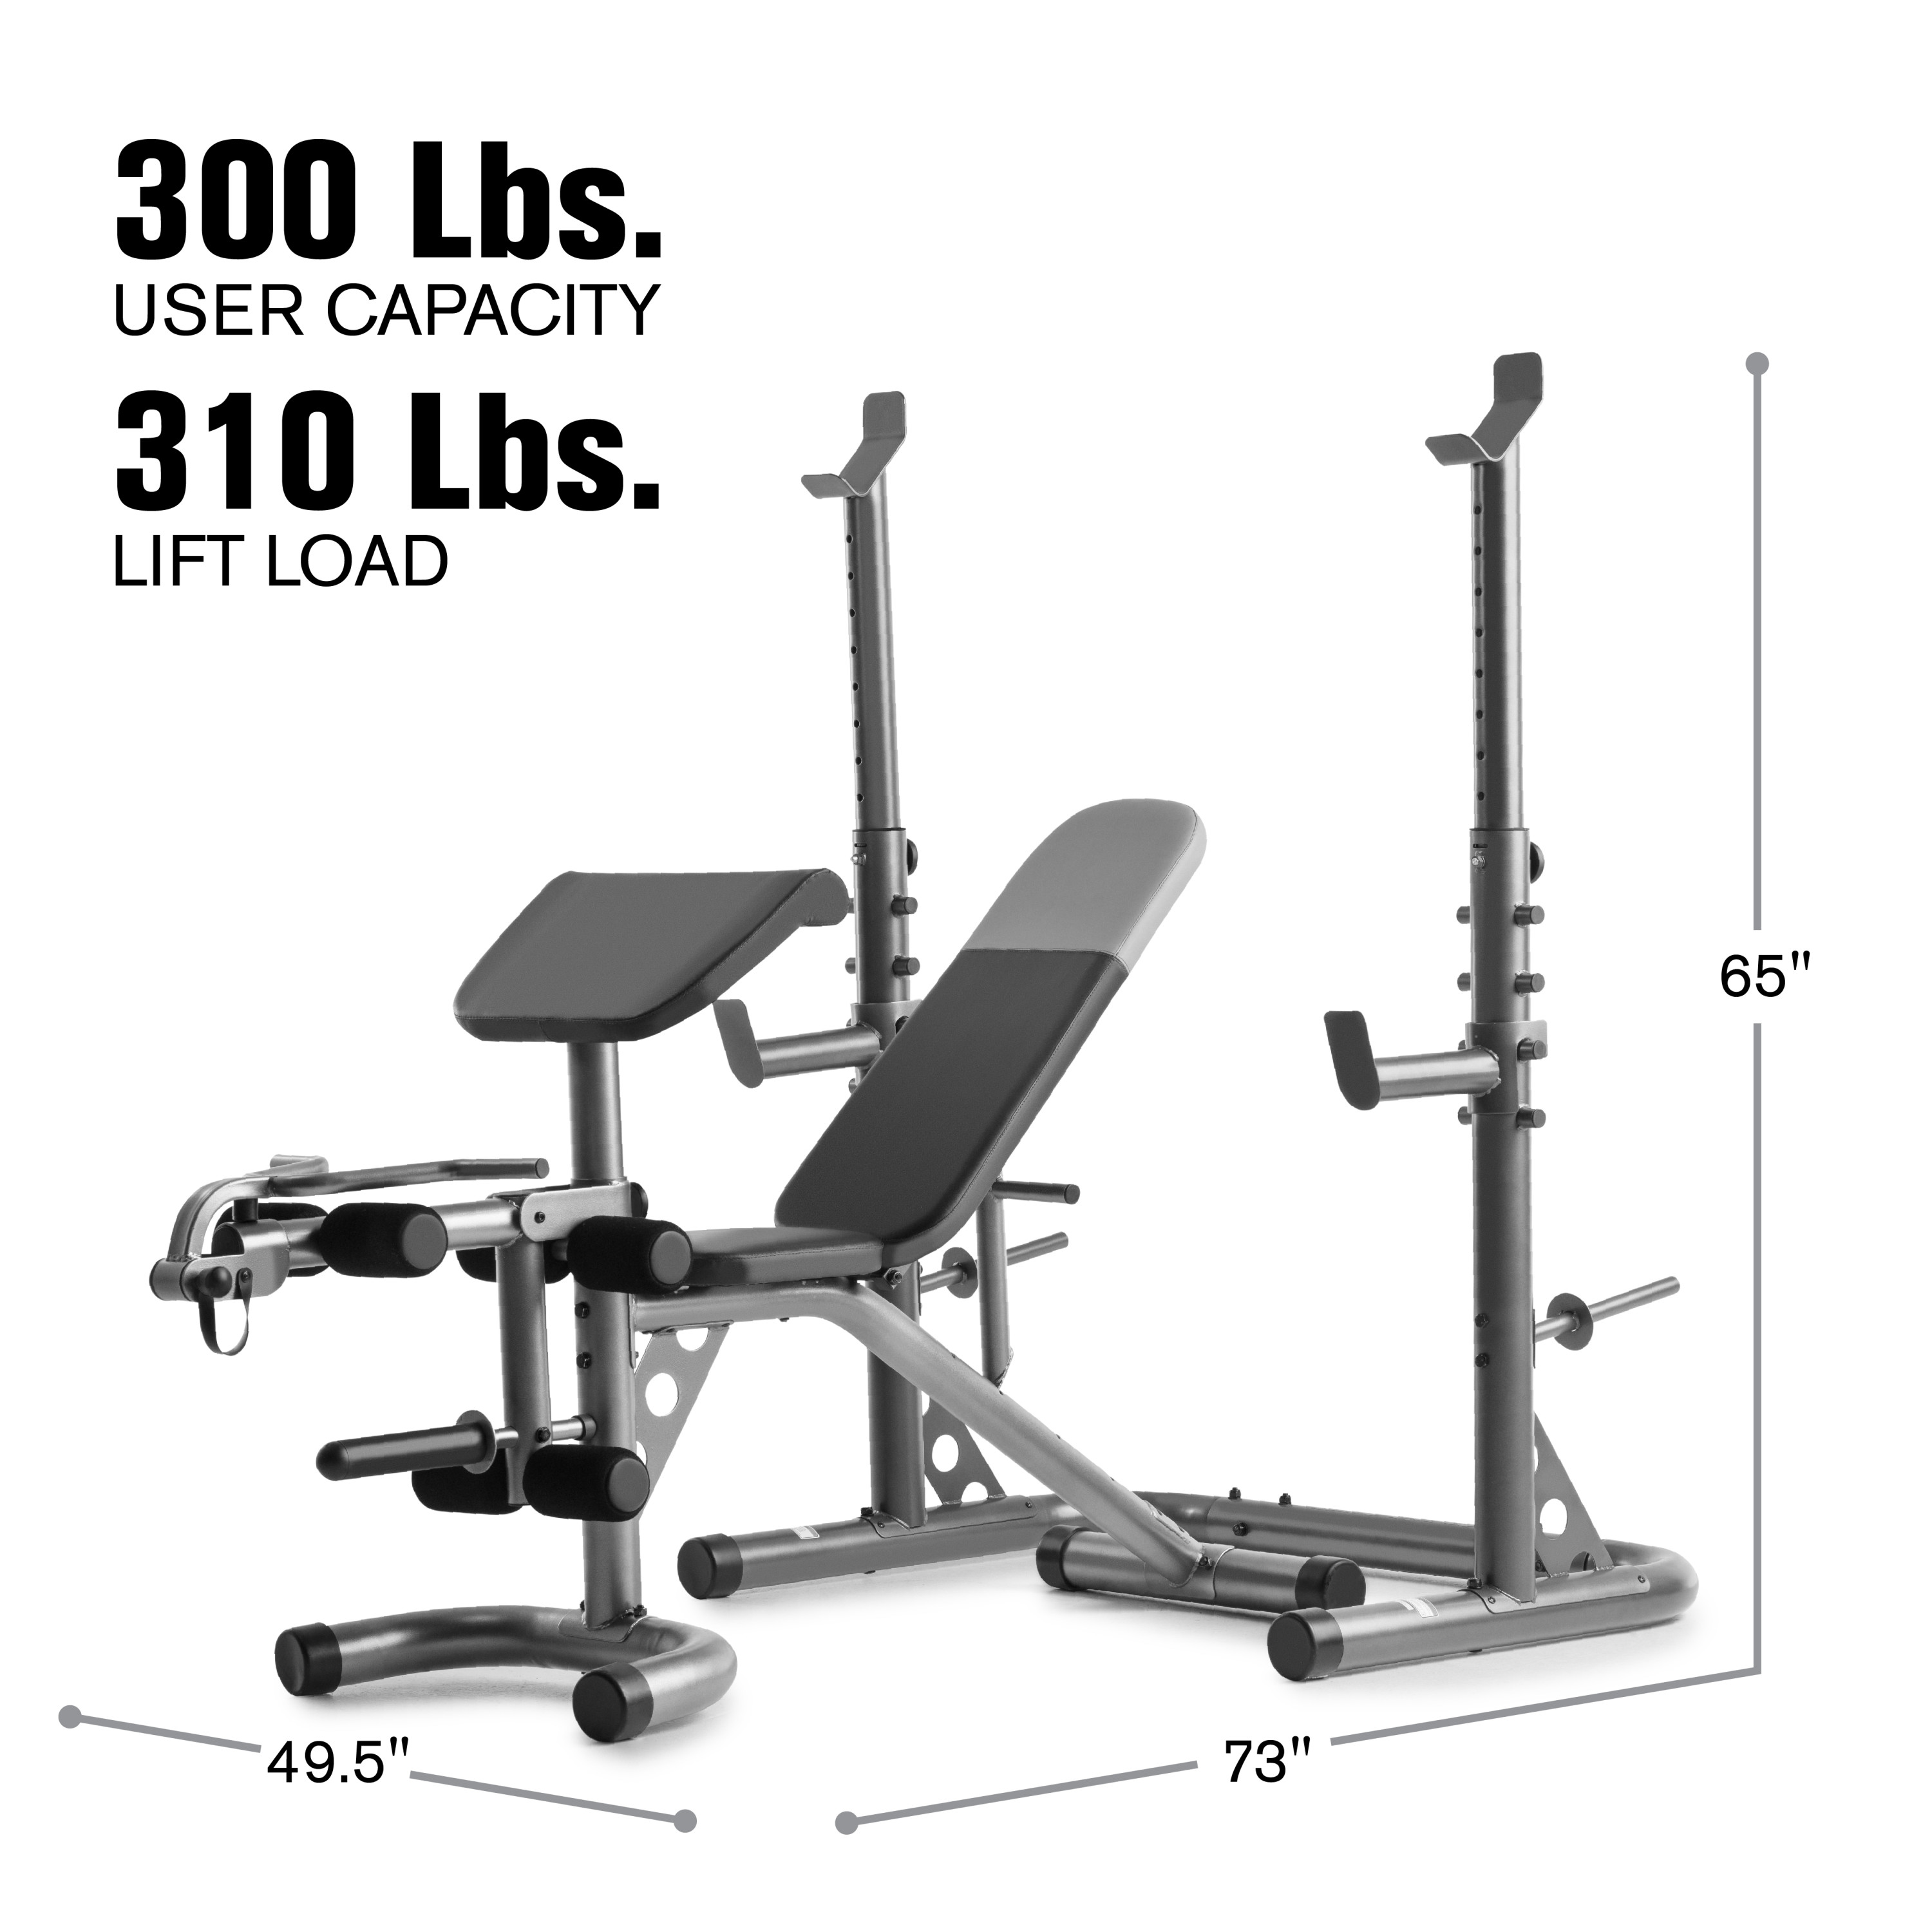 Weider XRS 20 Adjustable Bench with Olympic Squat Rack and Preacher Pad, 610 lb. Weight Limit - image 6 of 13